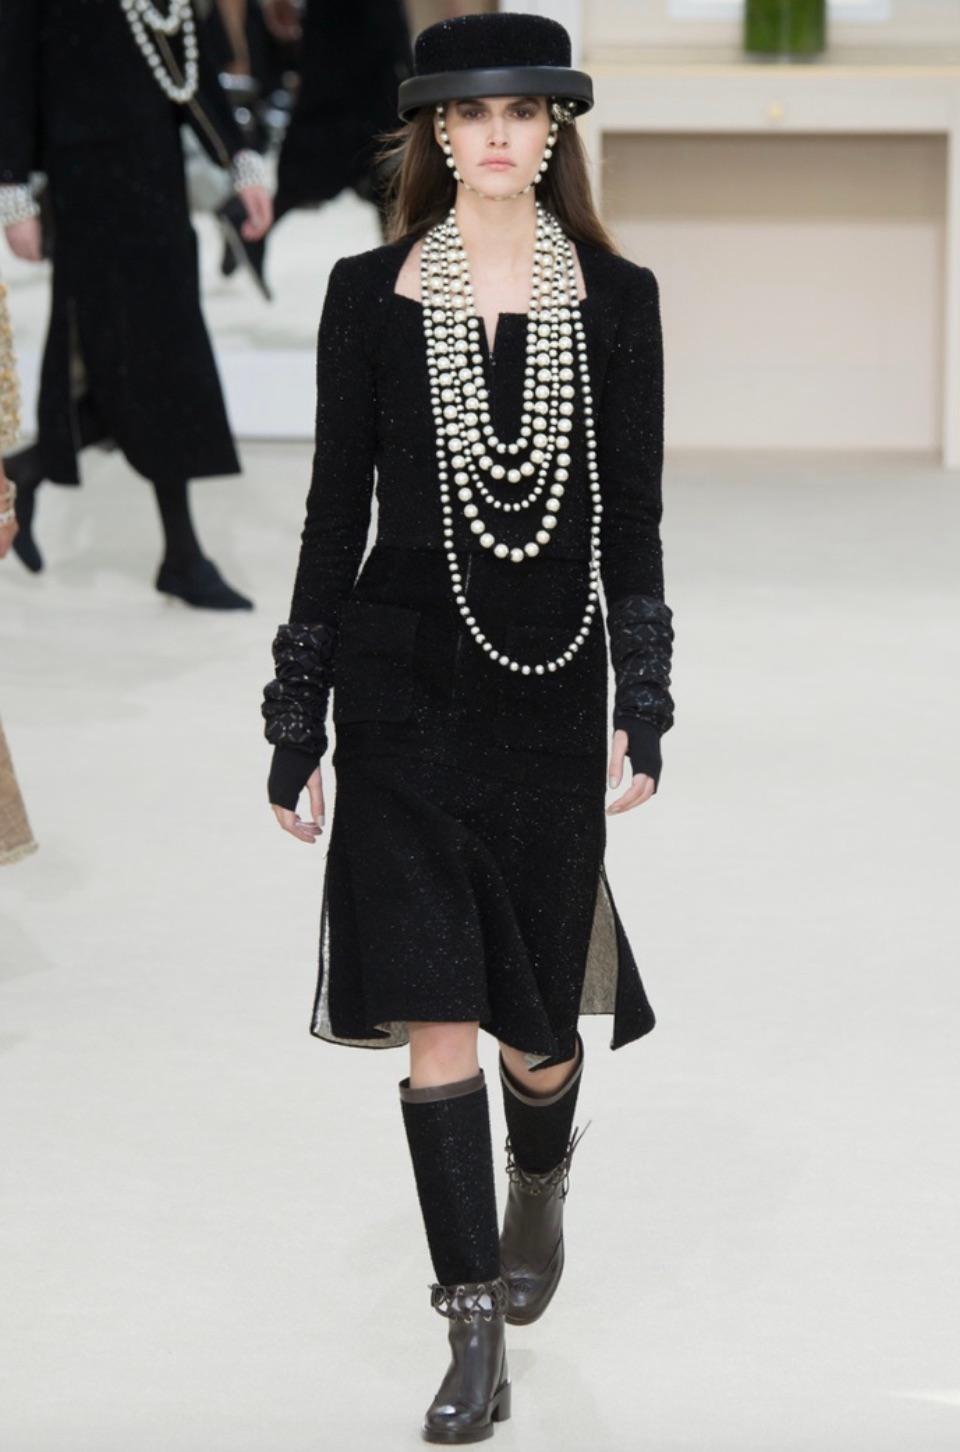 Meet the little black jacket from Chanel Fall/Winter 2016 collection. This elegant piece shines in sophistication. With its cropped length, flattering silhouette, and classic square neckline, it's perfect for evening outings. The delicate shimmery